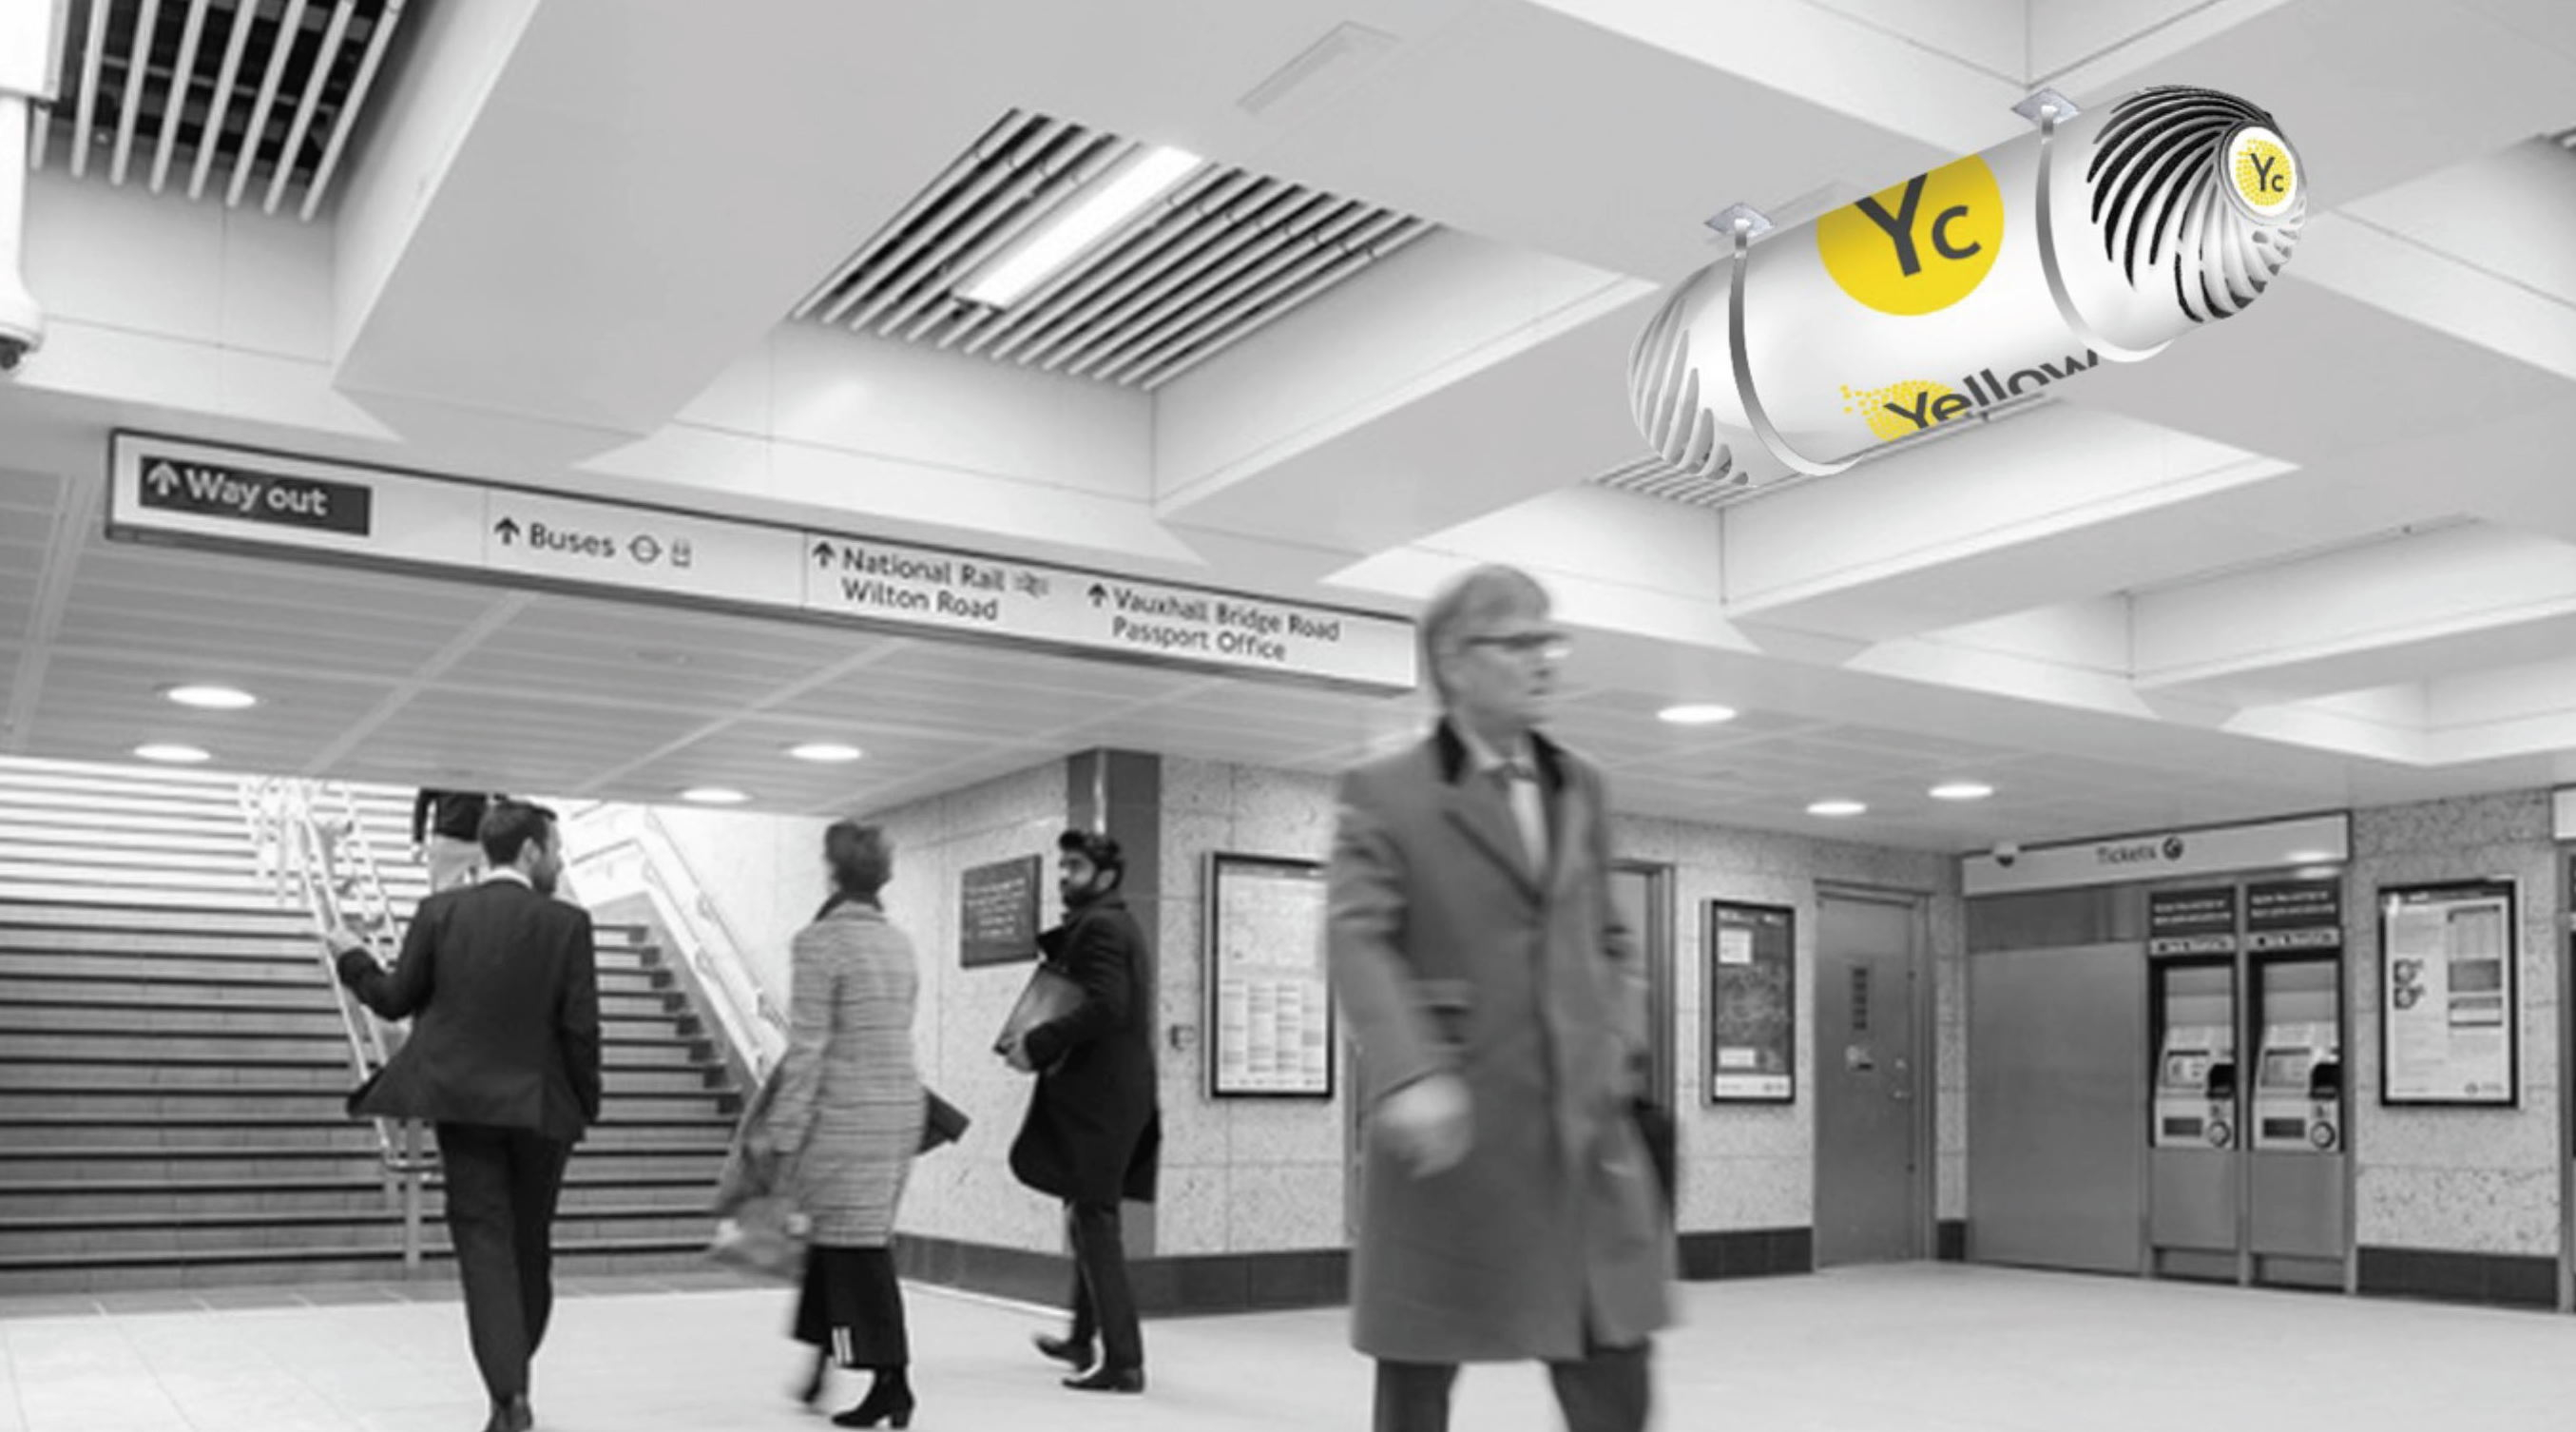 Computer generated image of Yellow Collective fan installed in railway station underground walkway, above commuters